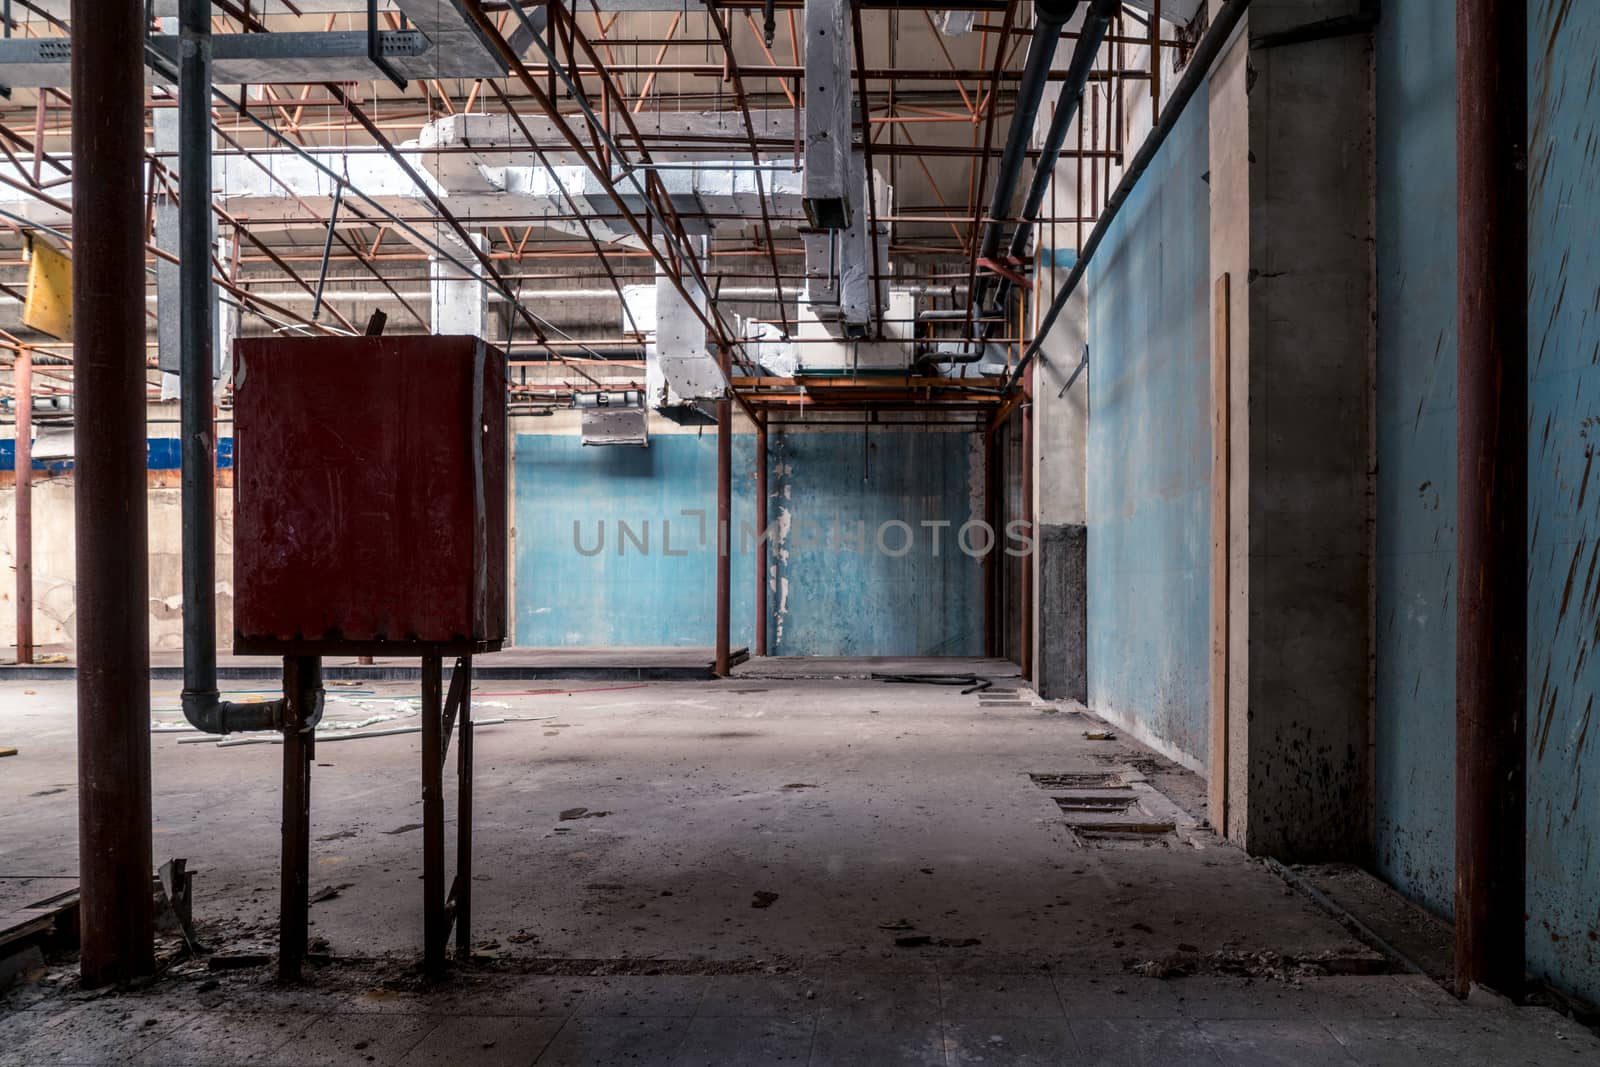 The abandoned industrial building. Fantasy interior scene. Shot in an abandoned ruin.